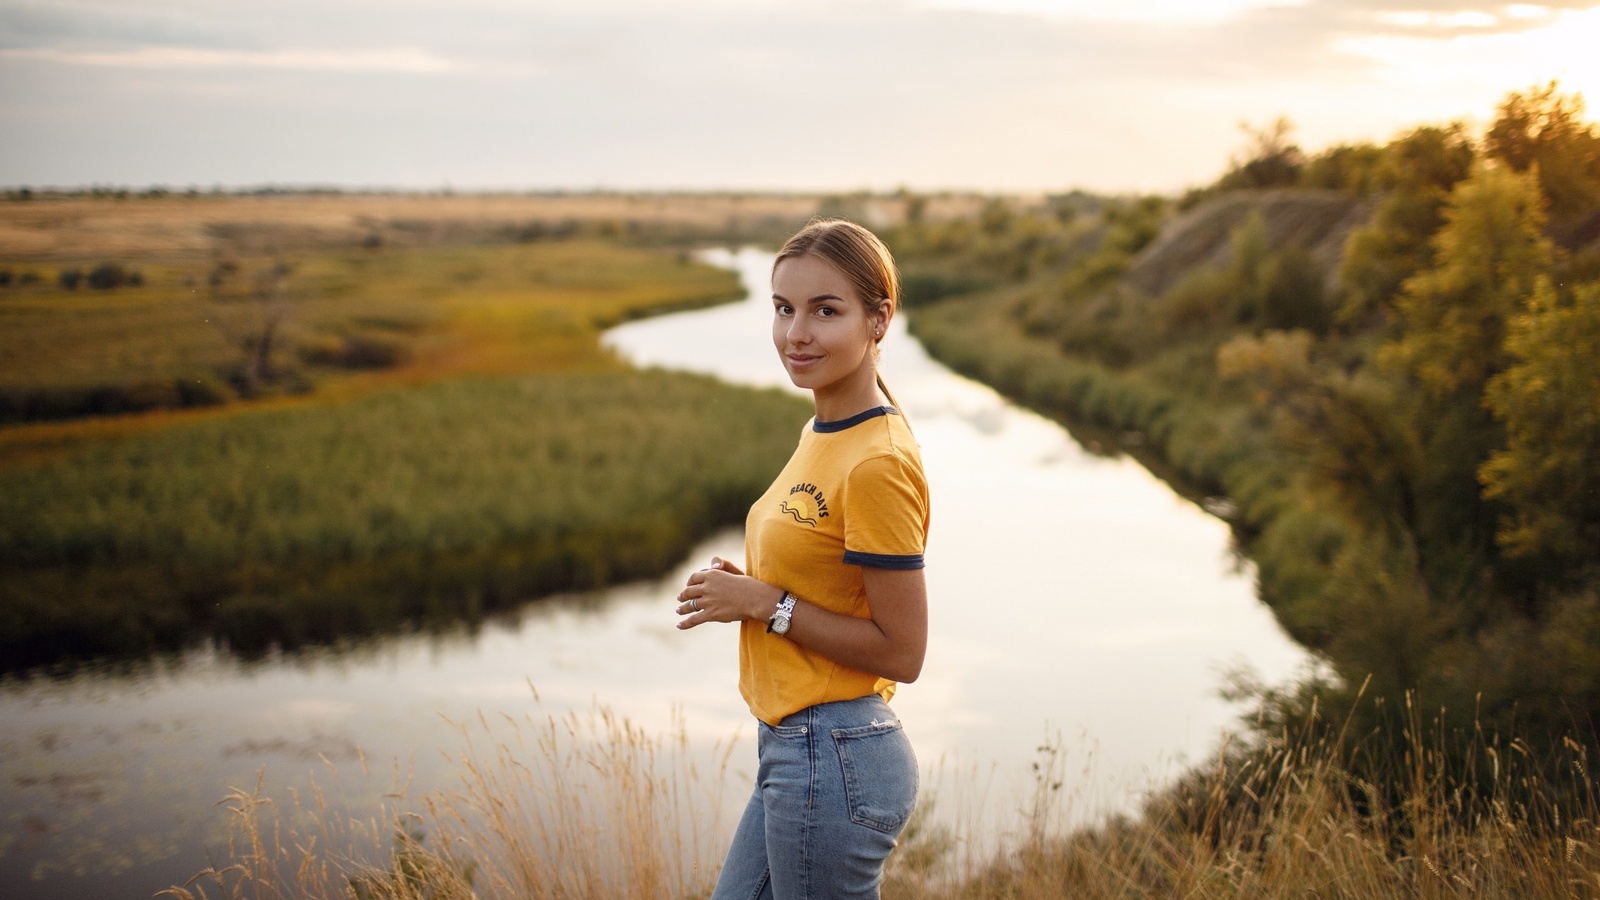 women, yellow t-shirt, smiling, river, jeans, nature, women outdoors, watch, ponytail, sky